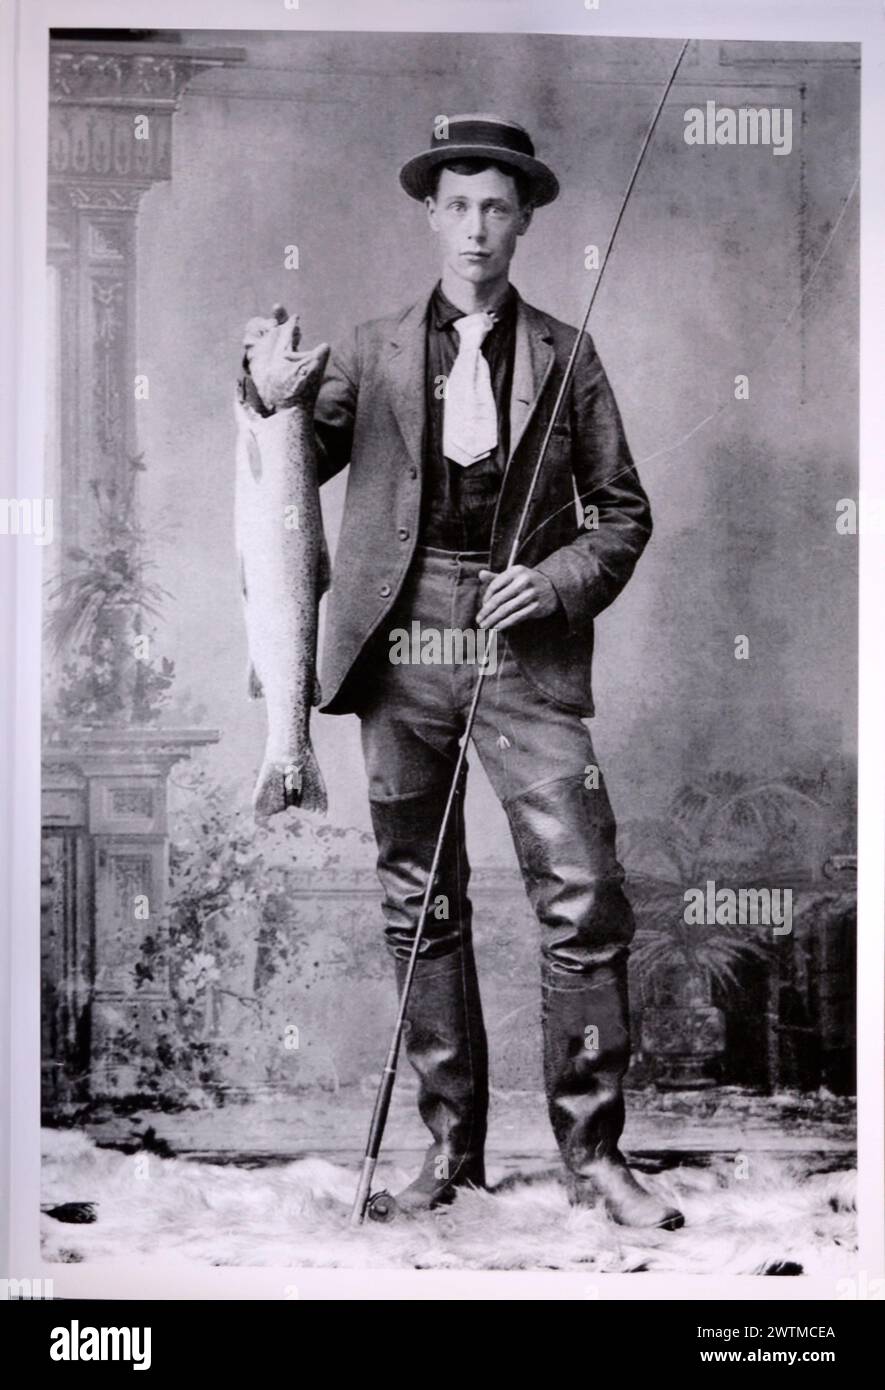 https://c8.alamy.com/comp/2WTMCEA/an-early-1900s-posed-studio-portrait-of-an-american-man-holding-a-fishing-pole-and-a-fish-for-sale-in-an-antique-shop-2WTMCEA.jpg